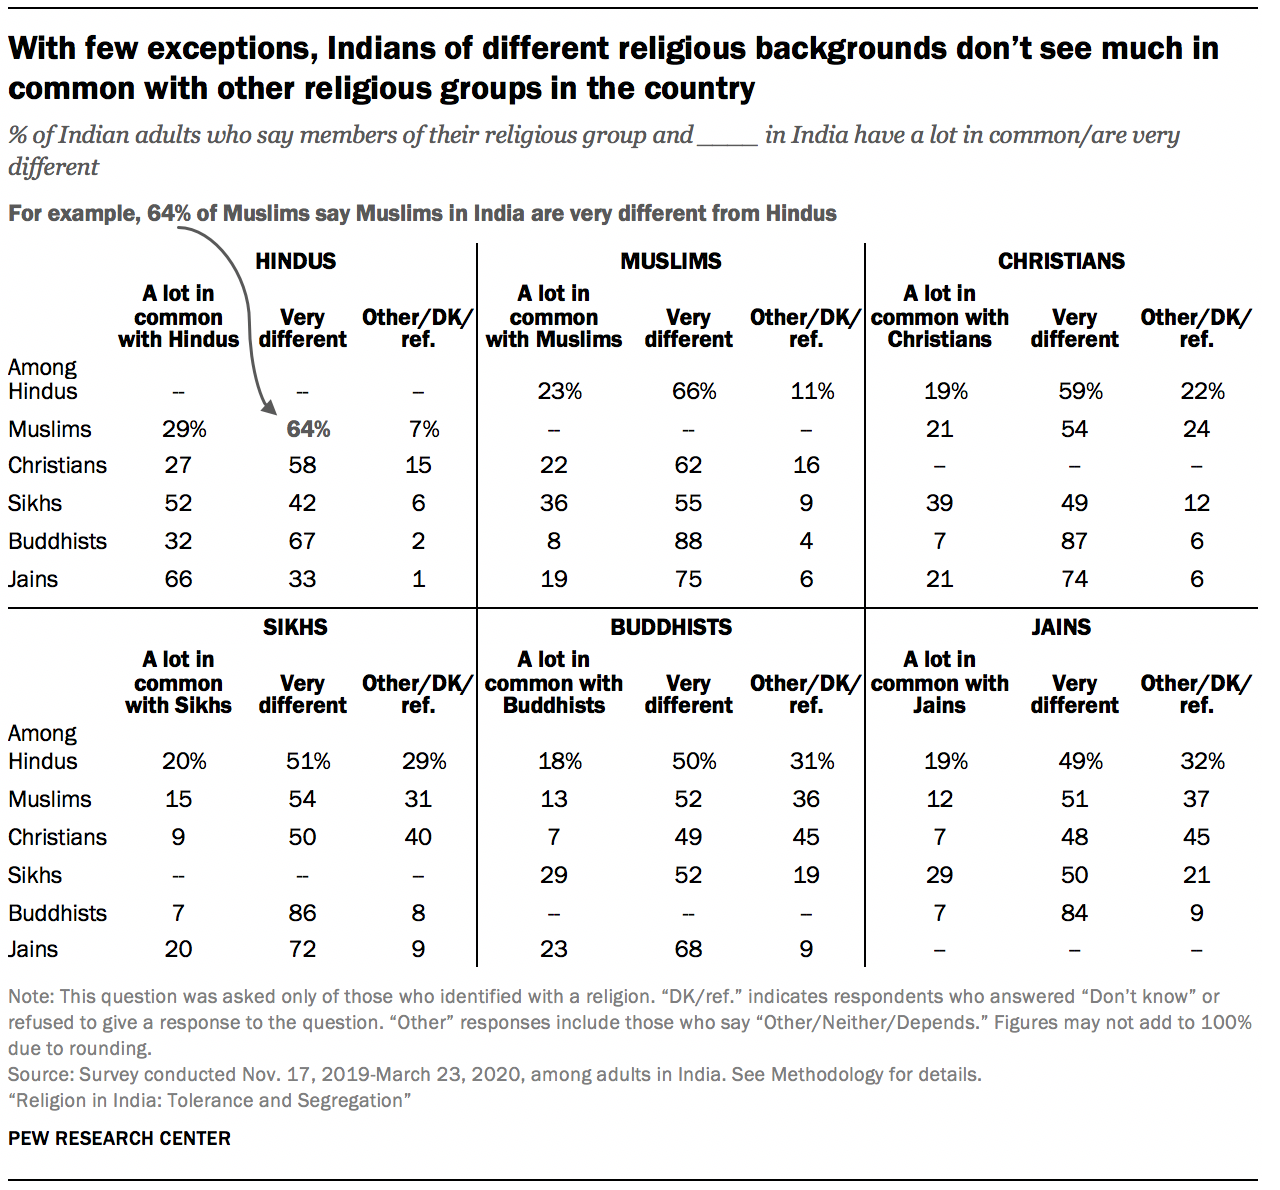 With few exceptions, Indians of different religious backgrounds don’t see much in common with other religious groups in the country